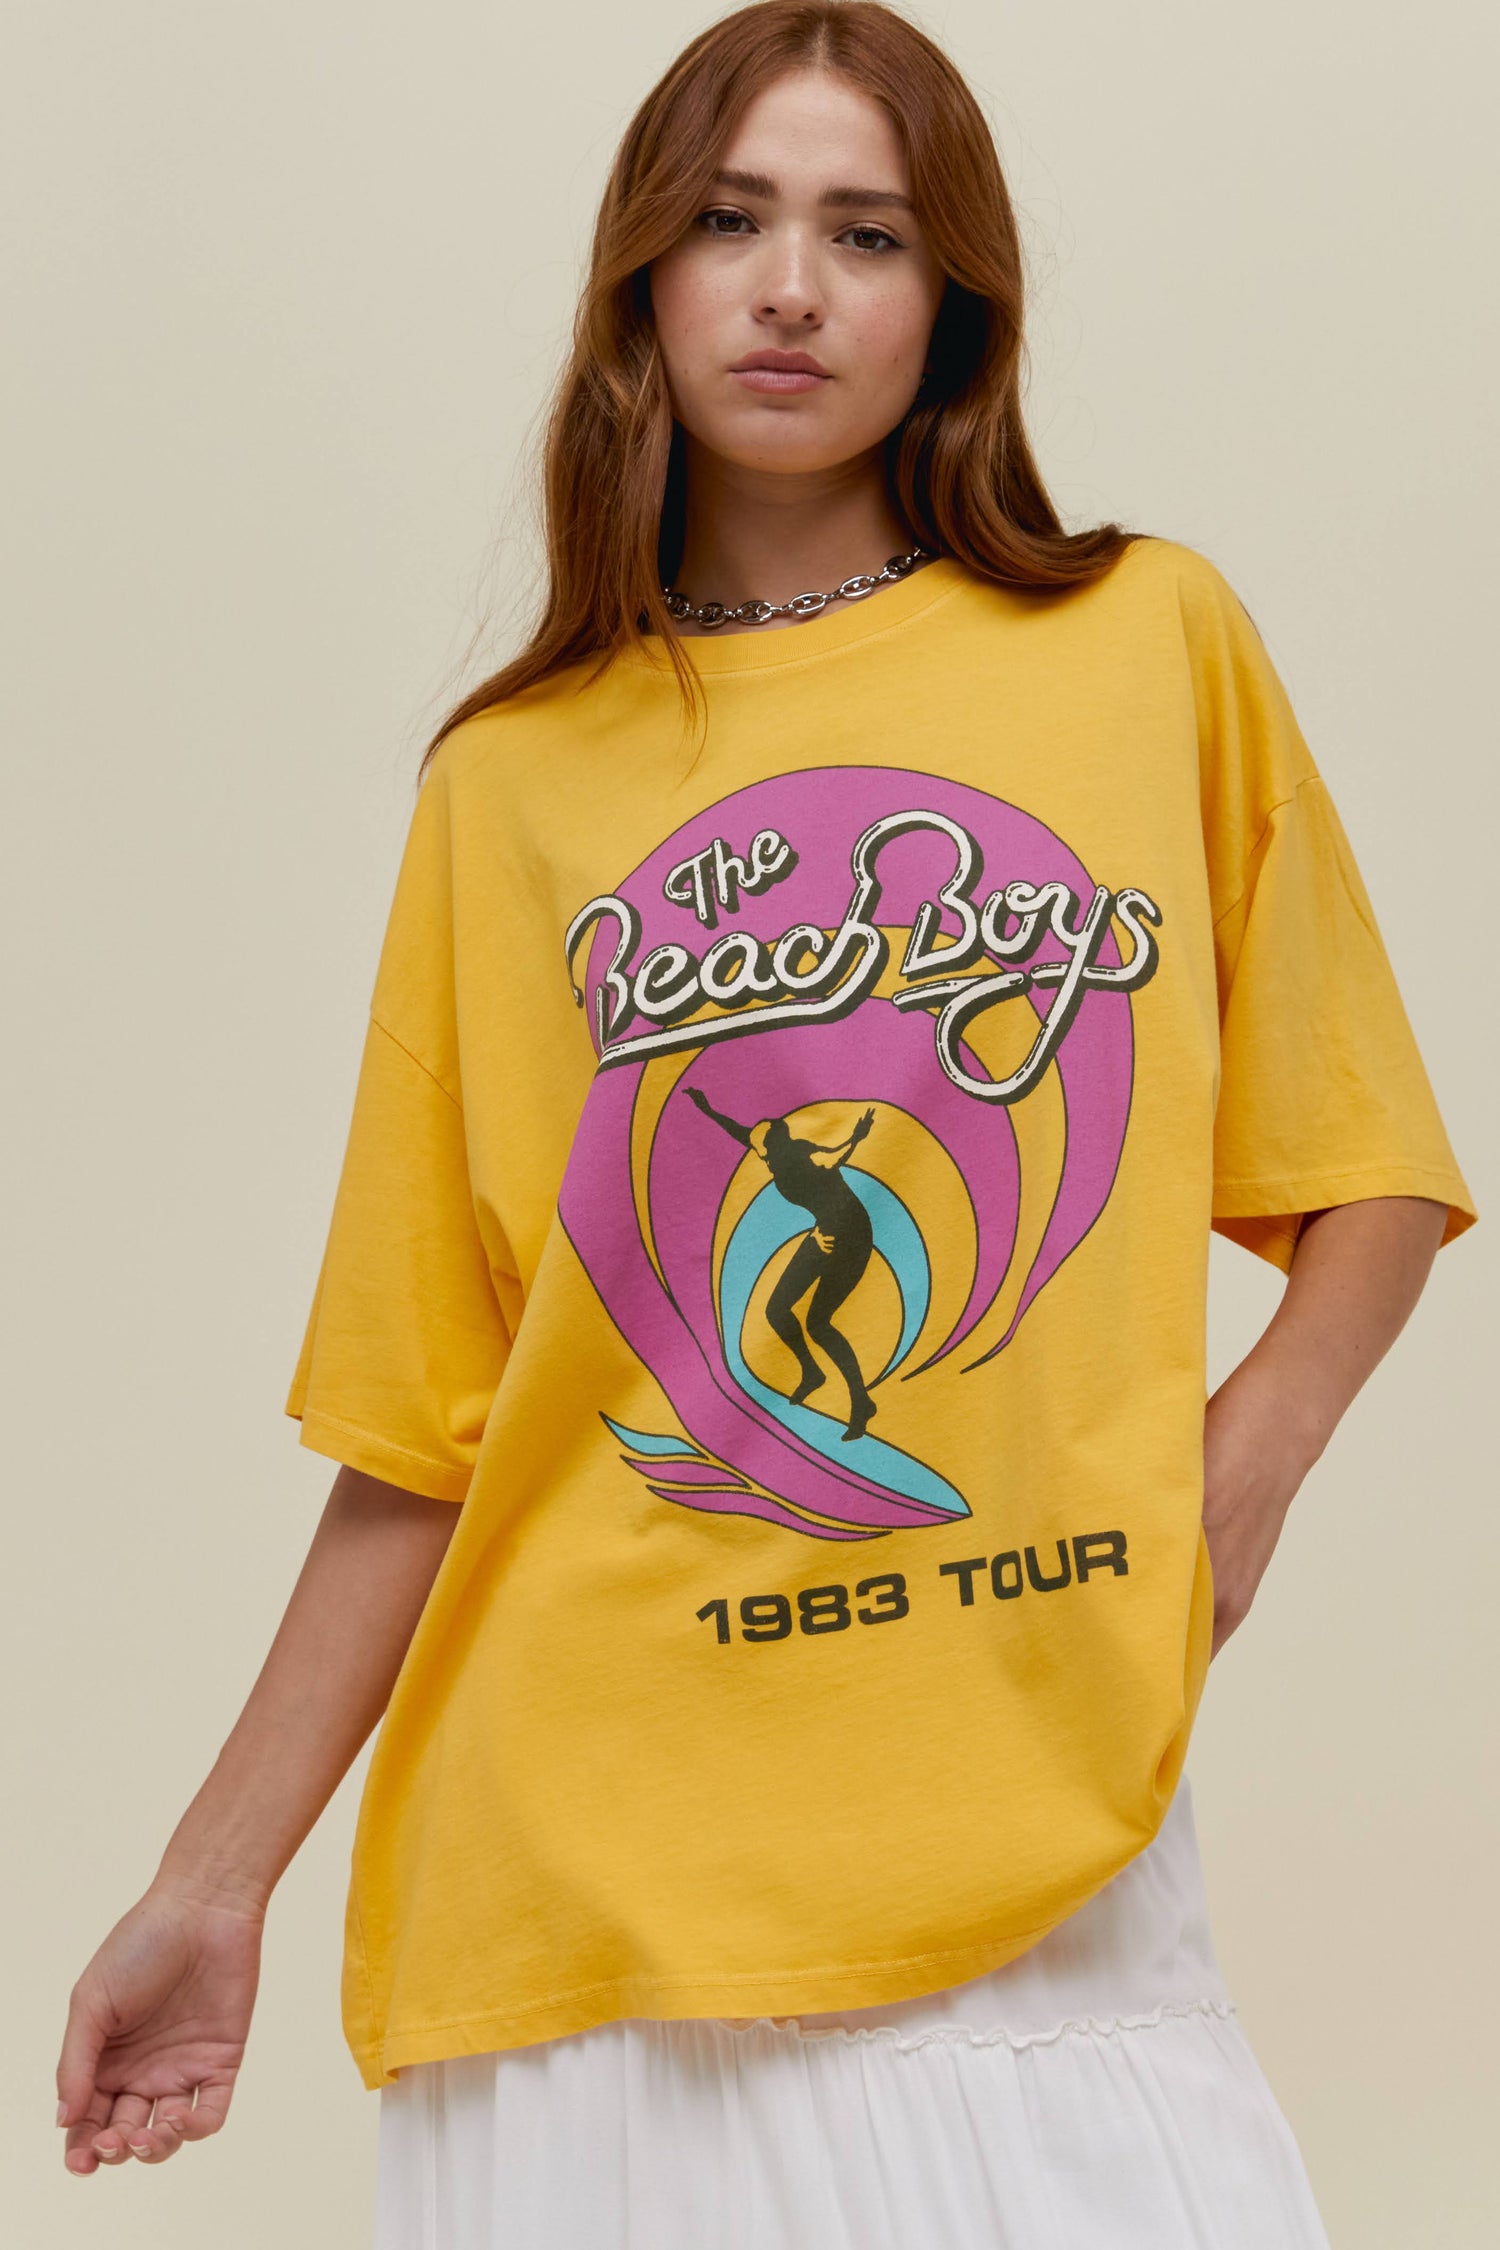 A straight-haired model featuring a dandelion tee stamped with 'The Beach Boys' and designed with the iconic surfing graphics.